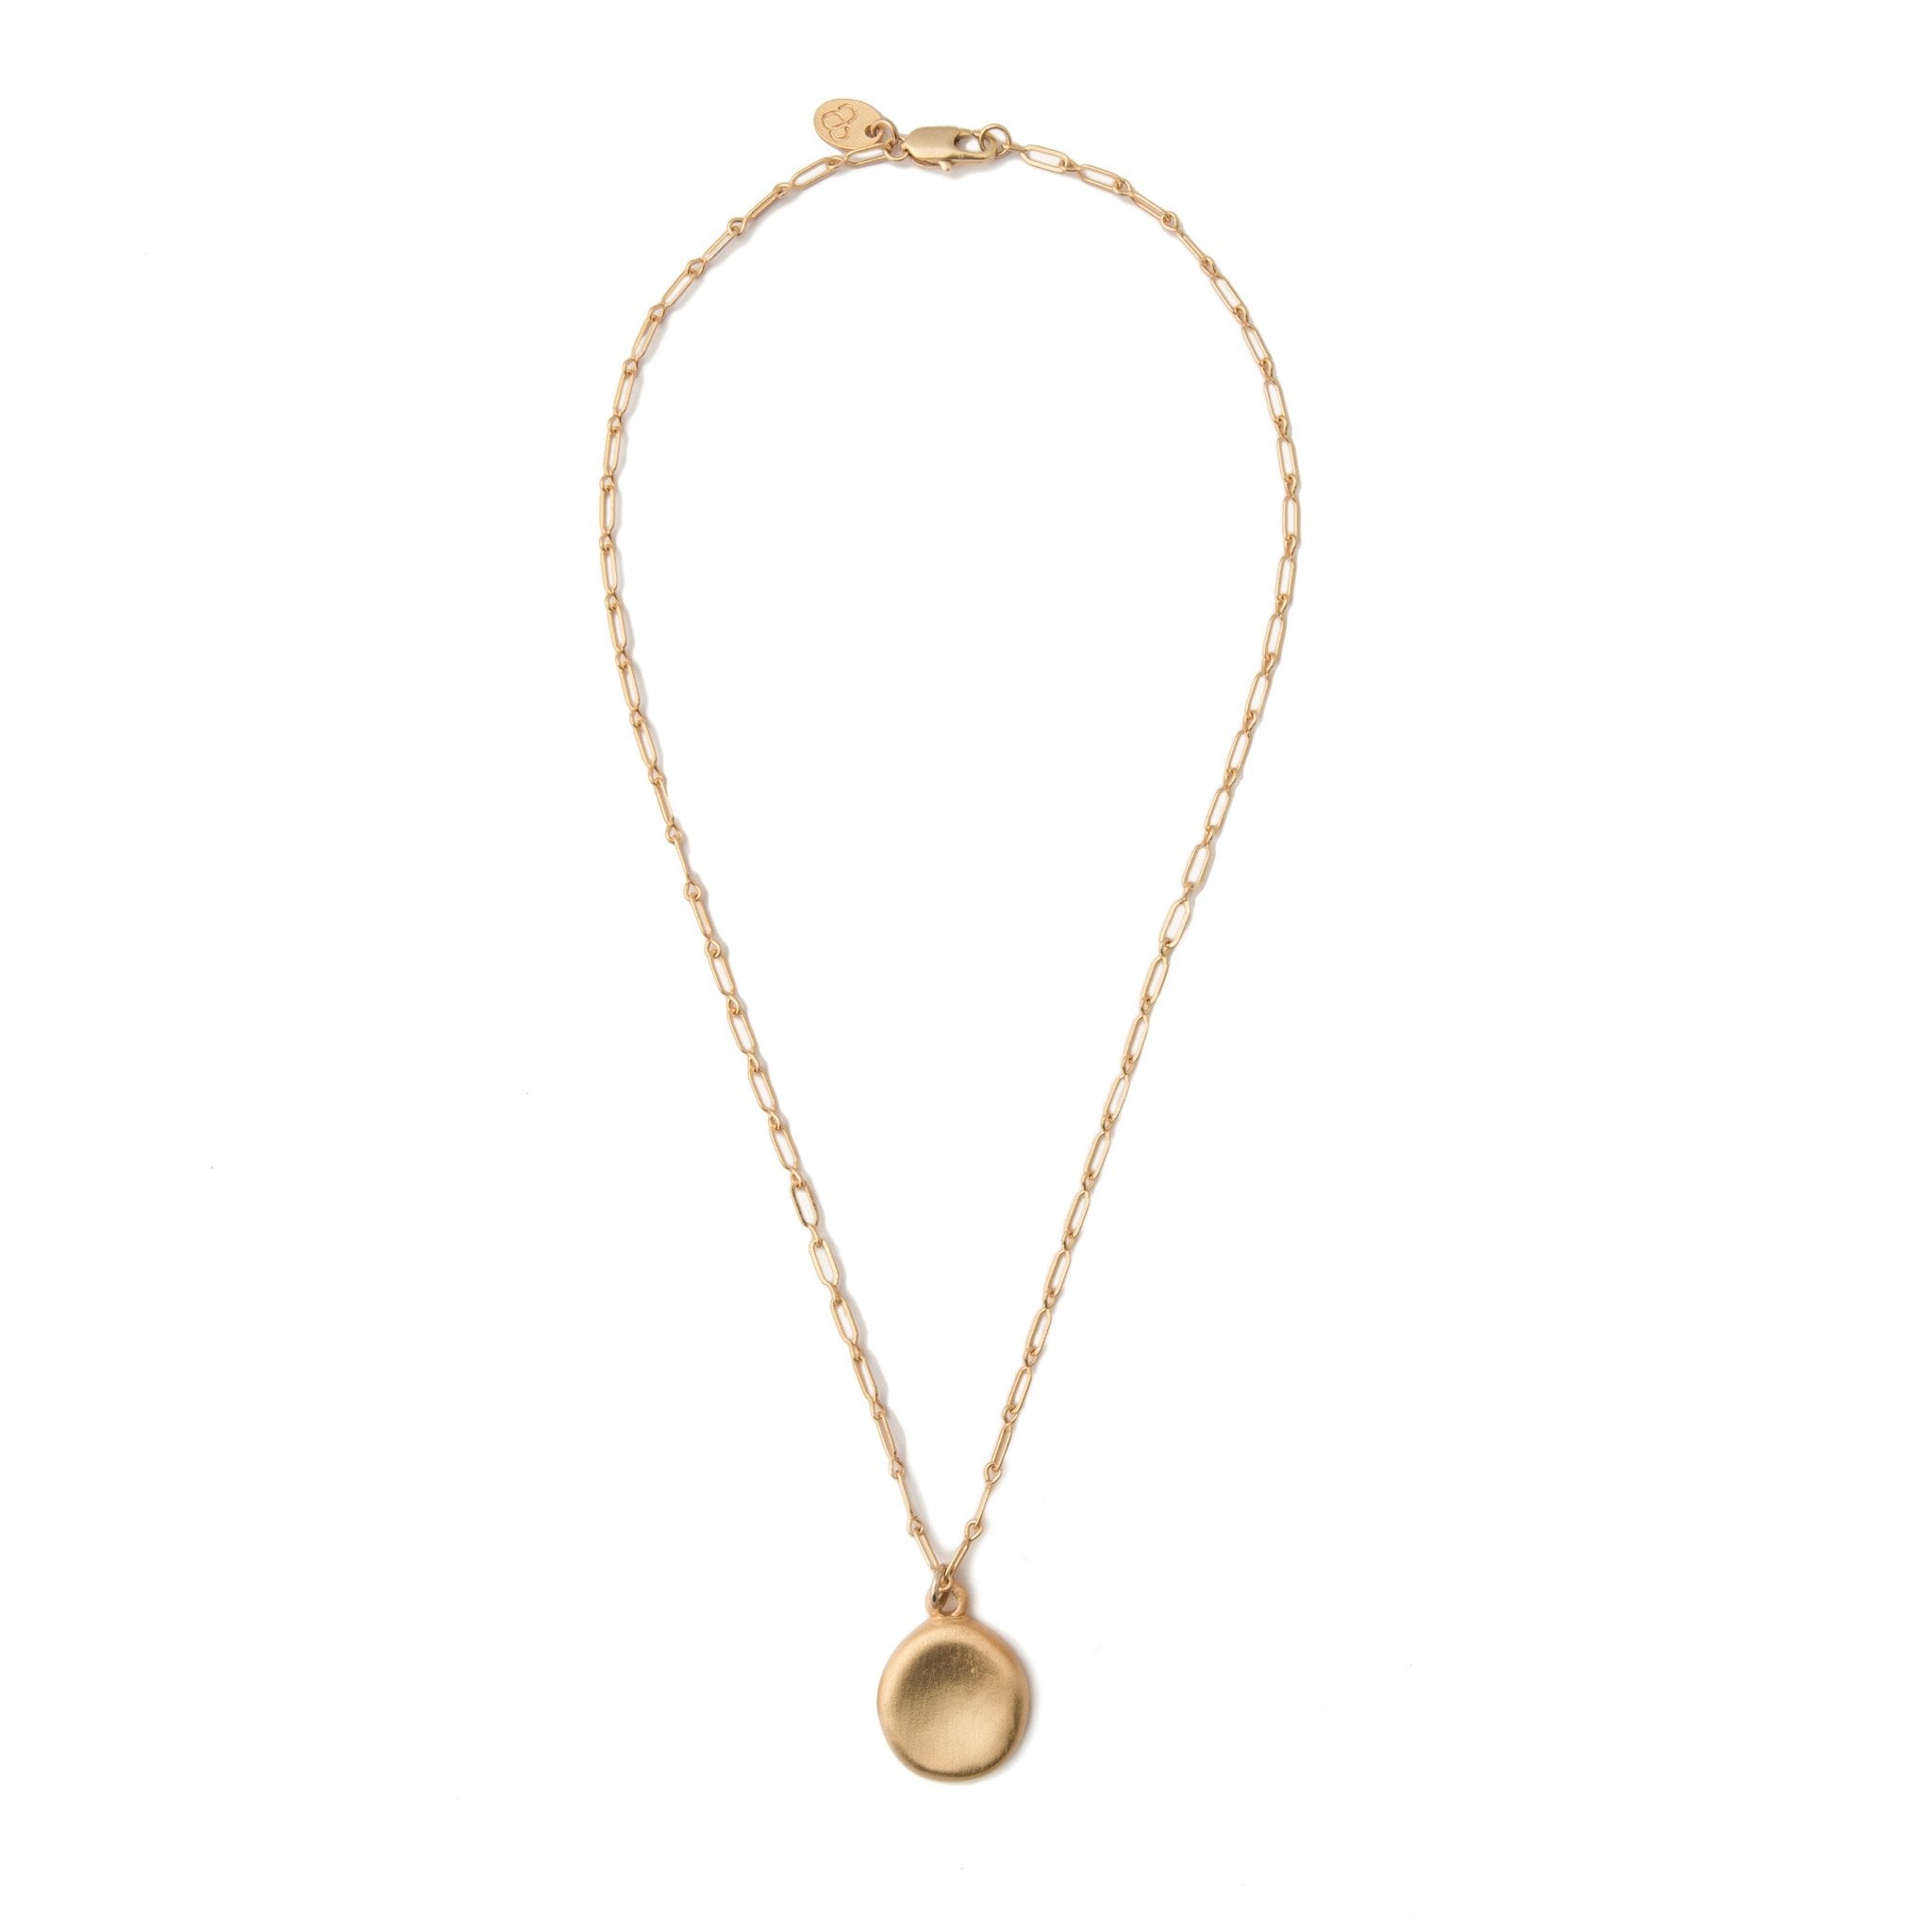 Gold Touch Stone Charm Necklace